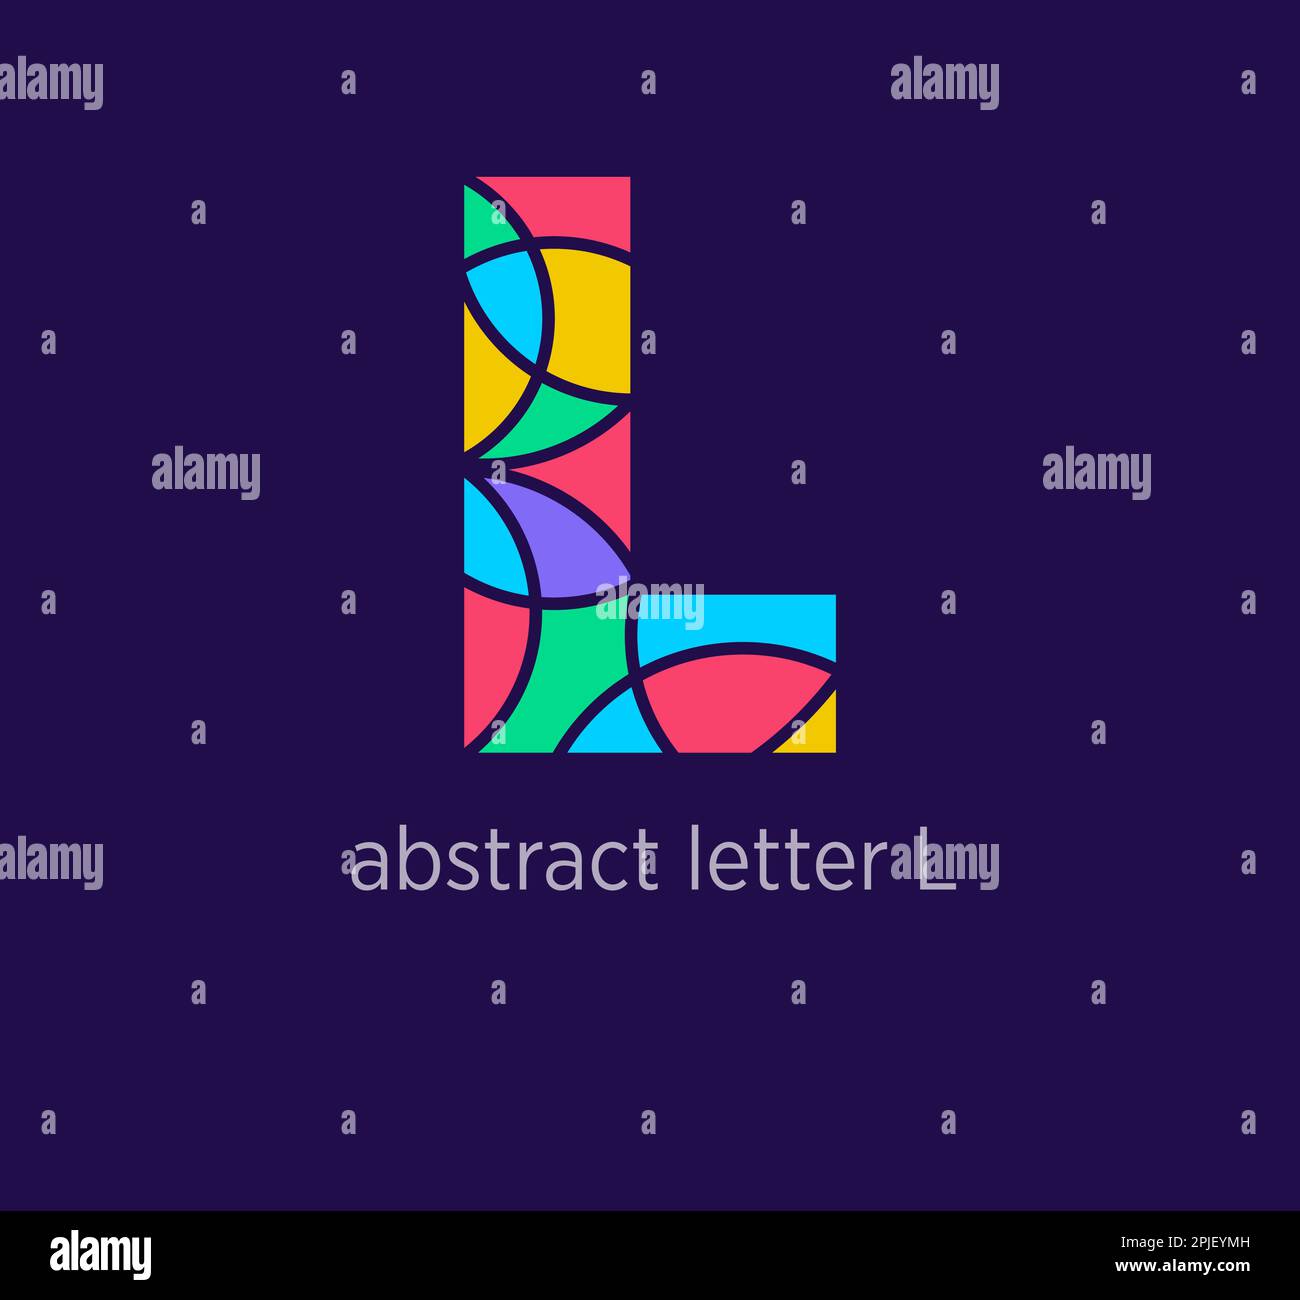 Abstract Letter Lv Circle Geometric Design Stock Vector (Royalty